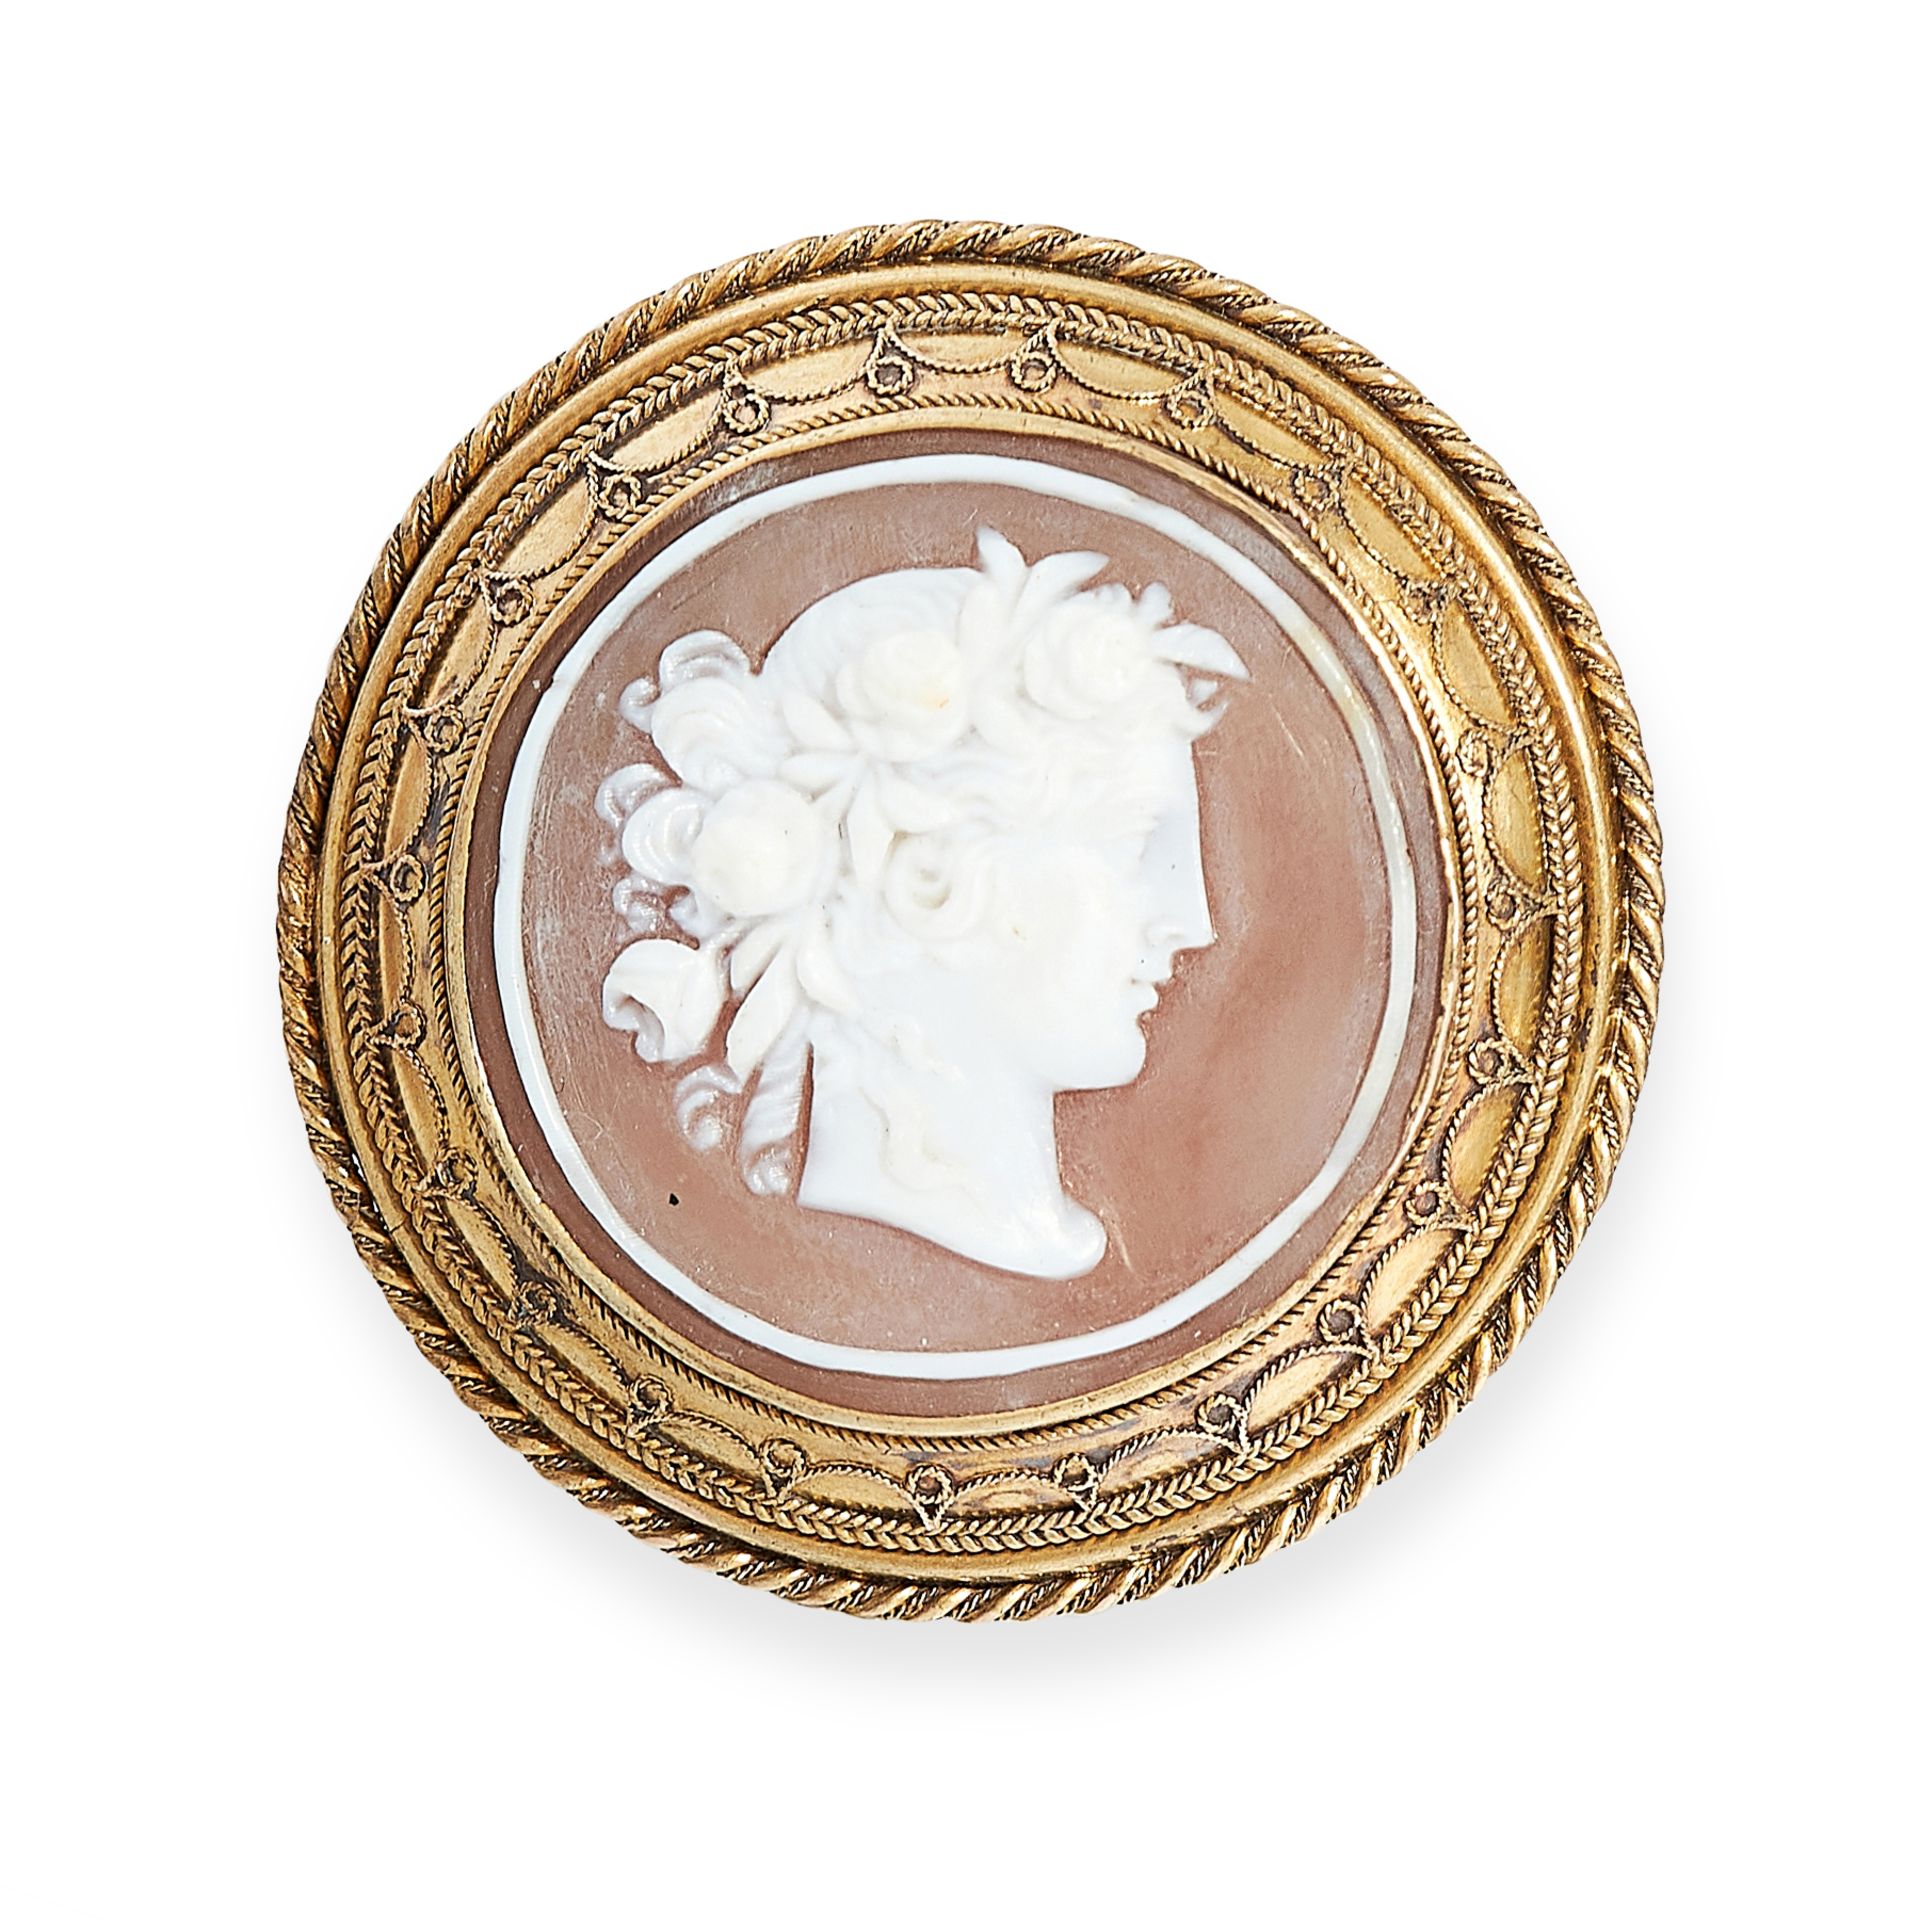 ANTIQUE CAMEO BROOCH, 19TH CENTURY mounted in yellow gold, set to the centre with a circular